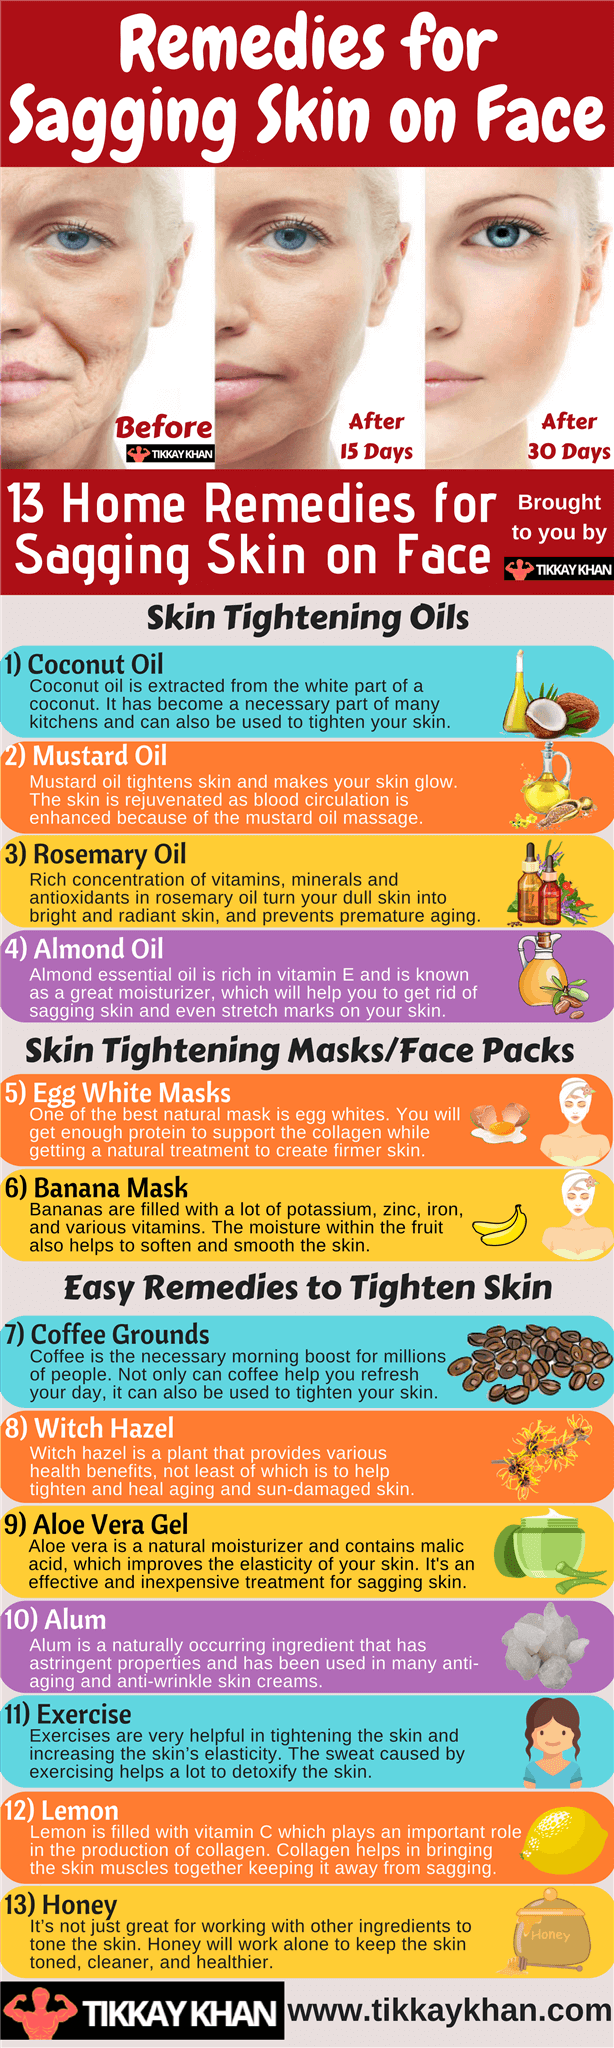 Remedies for Sagging Skin on Face Infographic